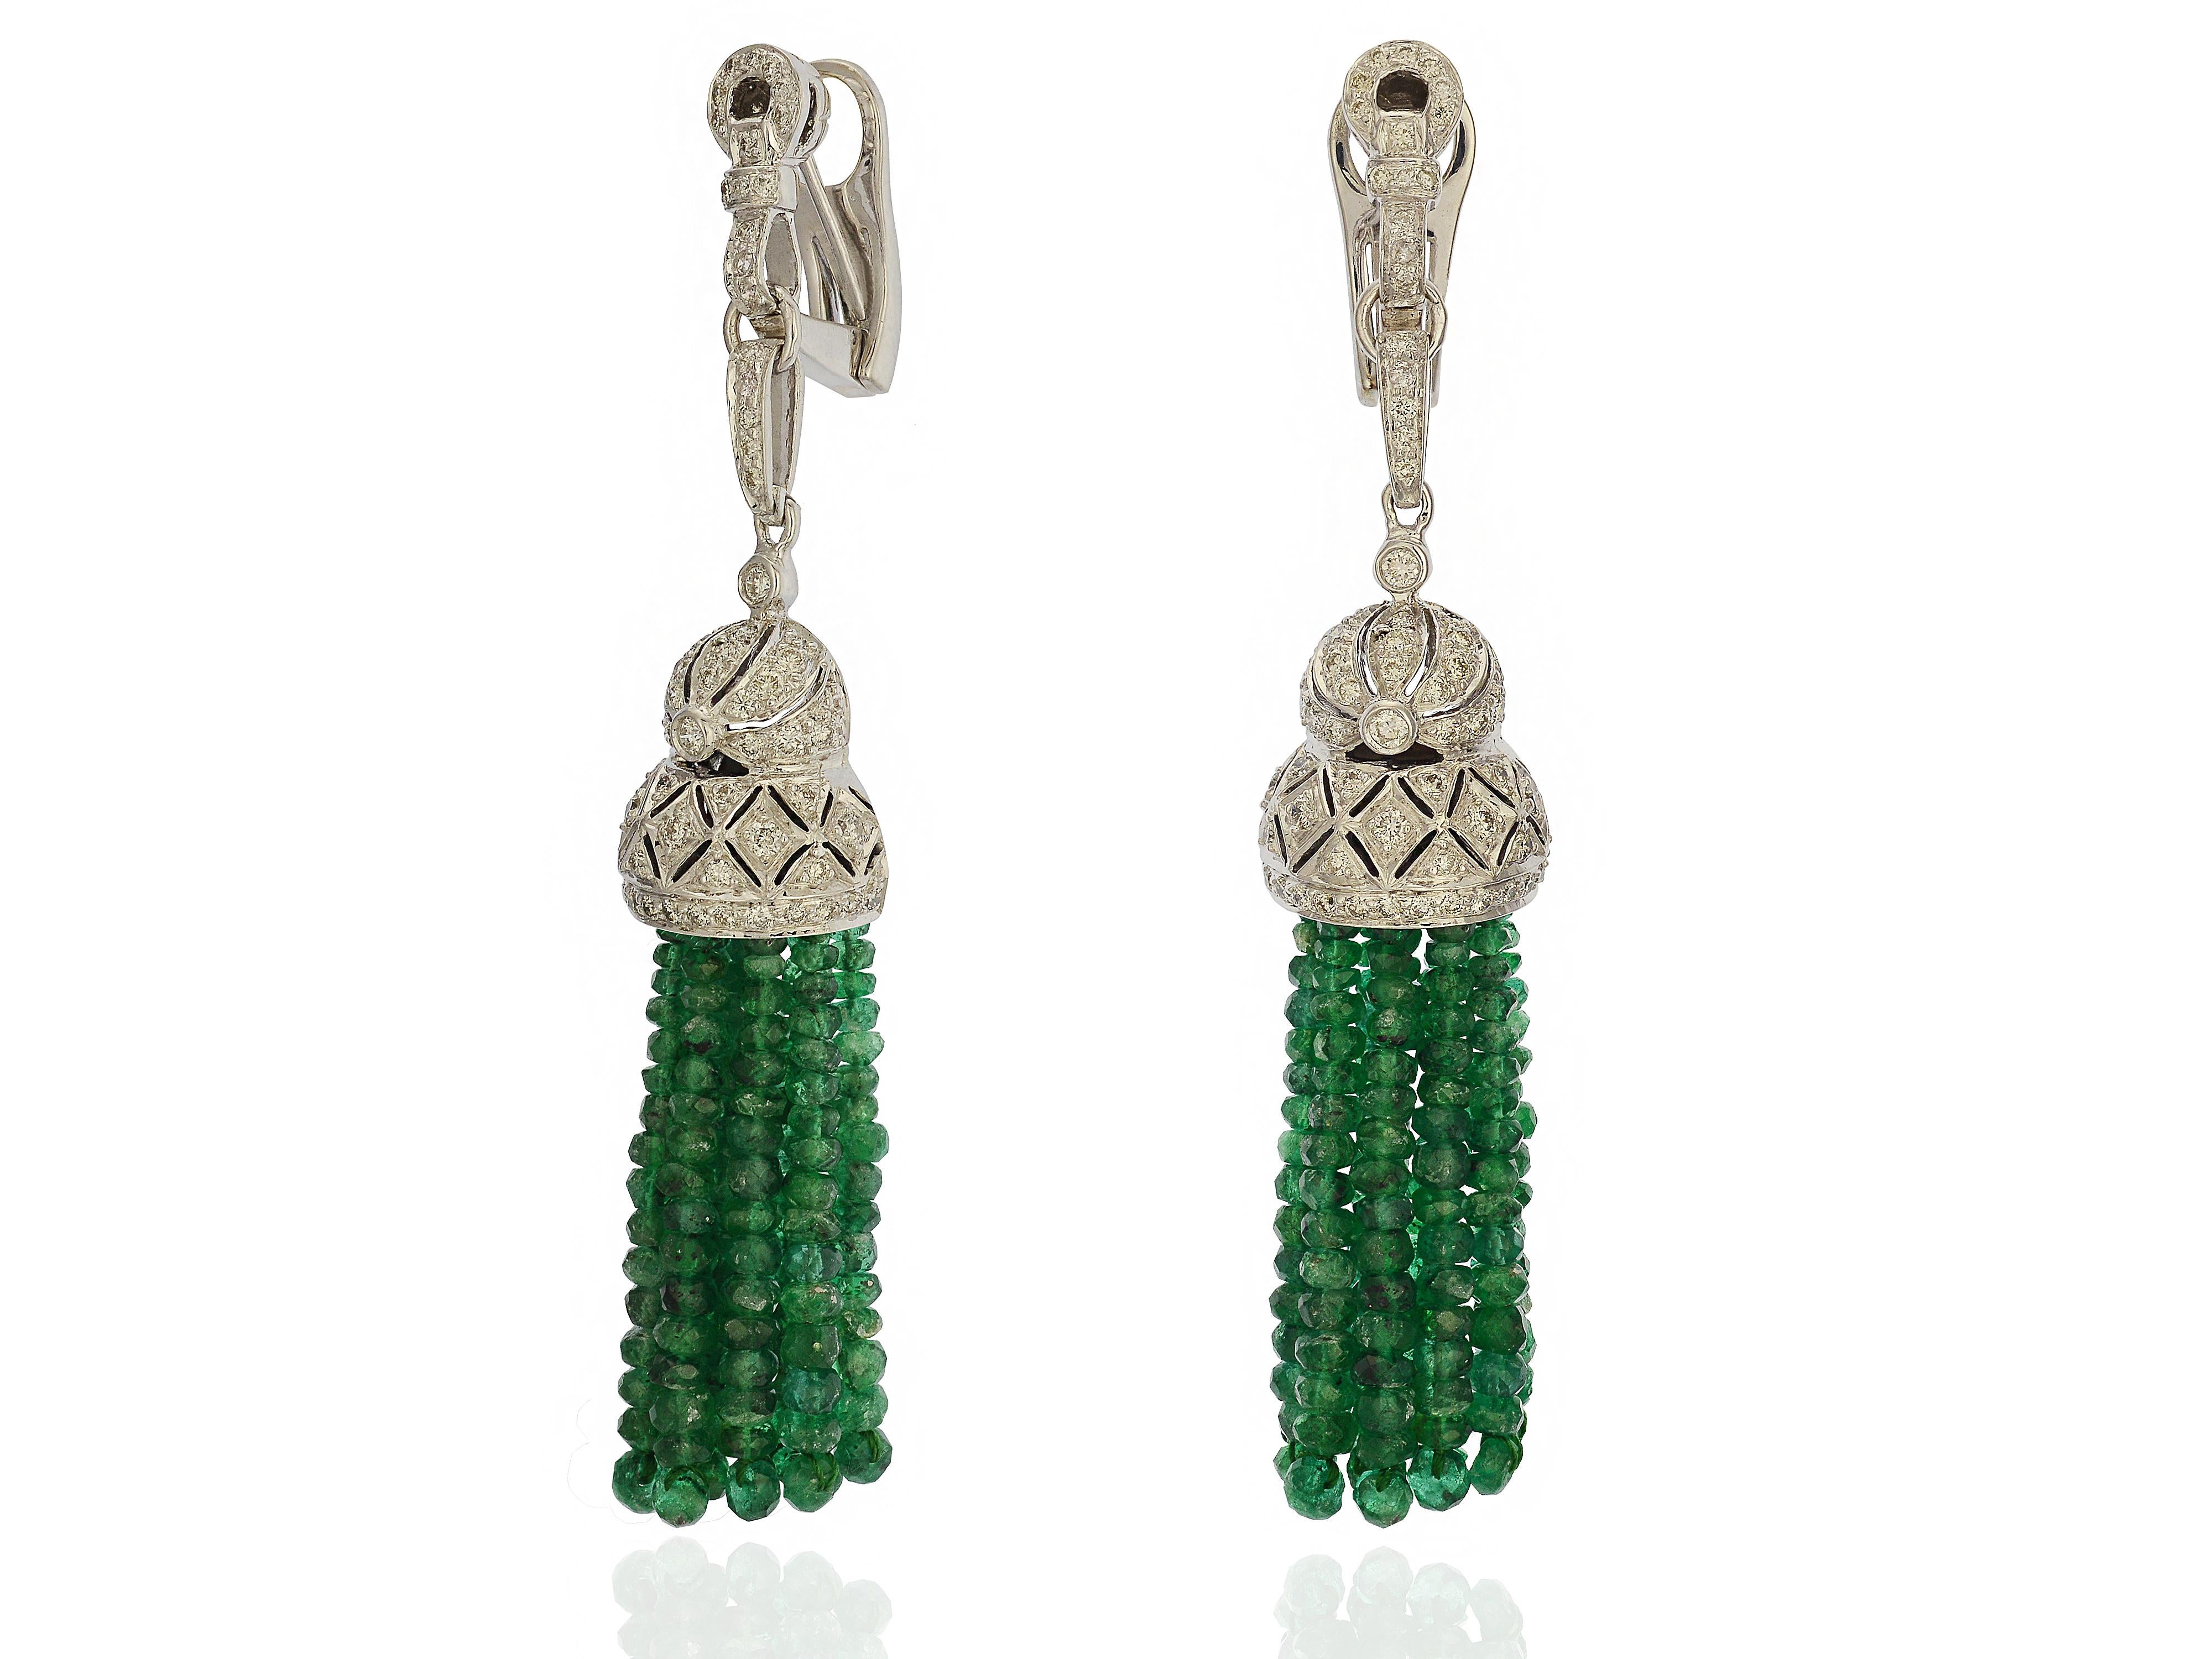 18 Karat White Gold & Emerald Tassel Drop Earrings
124 Round Brilliant Cut Diamonds Total Approximately 2.00 Carats
SI Clarity & H Color
20 Strands of Faceted Emerald Beads
Omega Clip Back with Collapsible Post